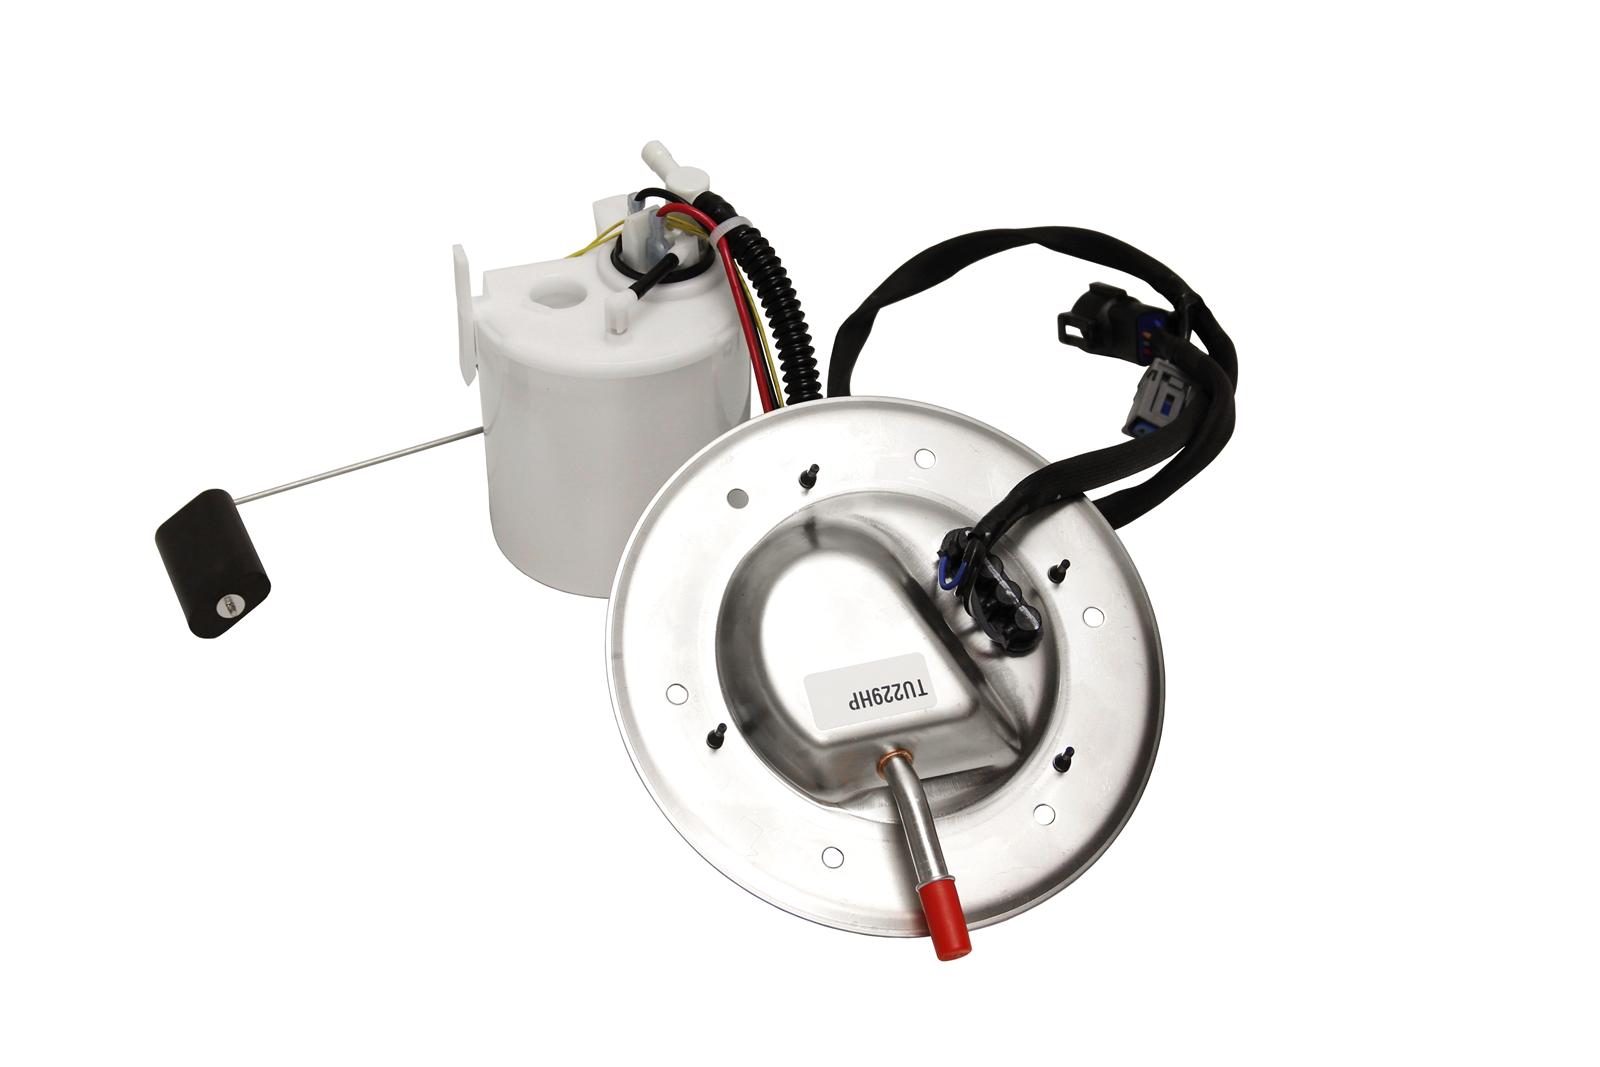 2001-04 Ford Mustang BBK Performance 300LPH Electronic Fuel Pump Kit - Direct Replacement